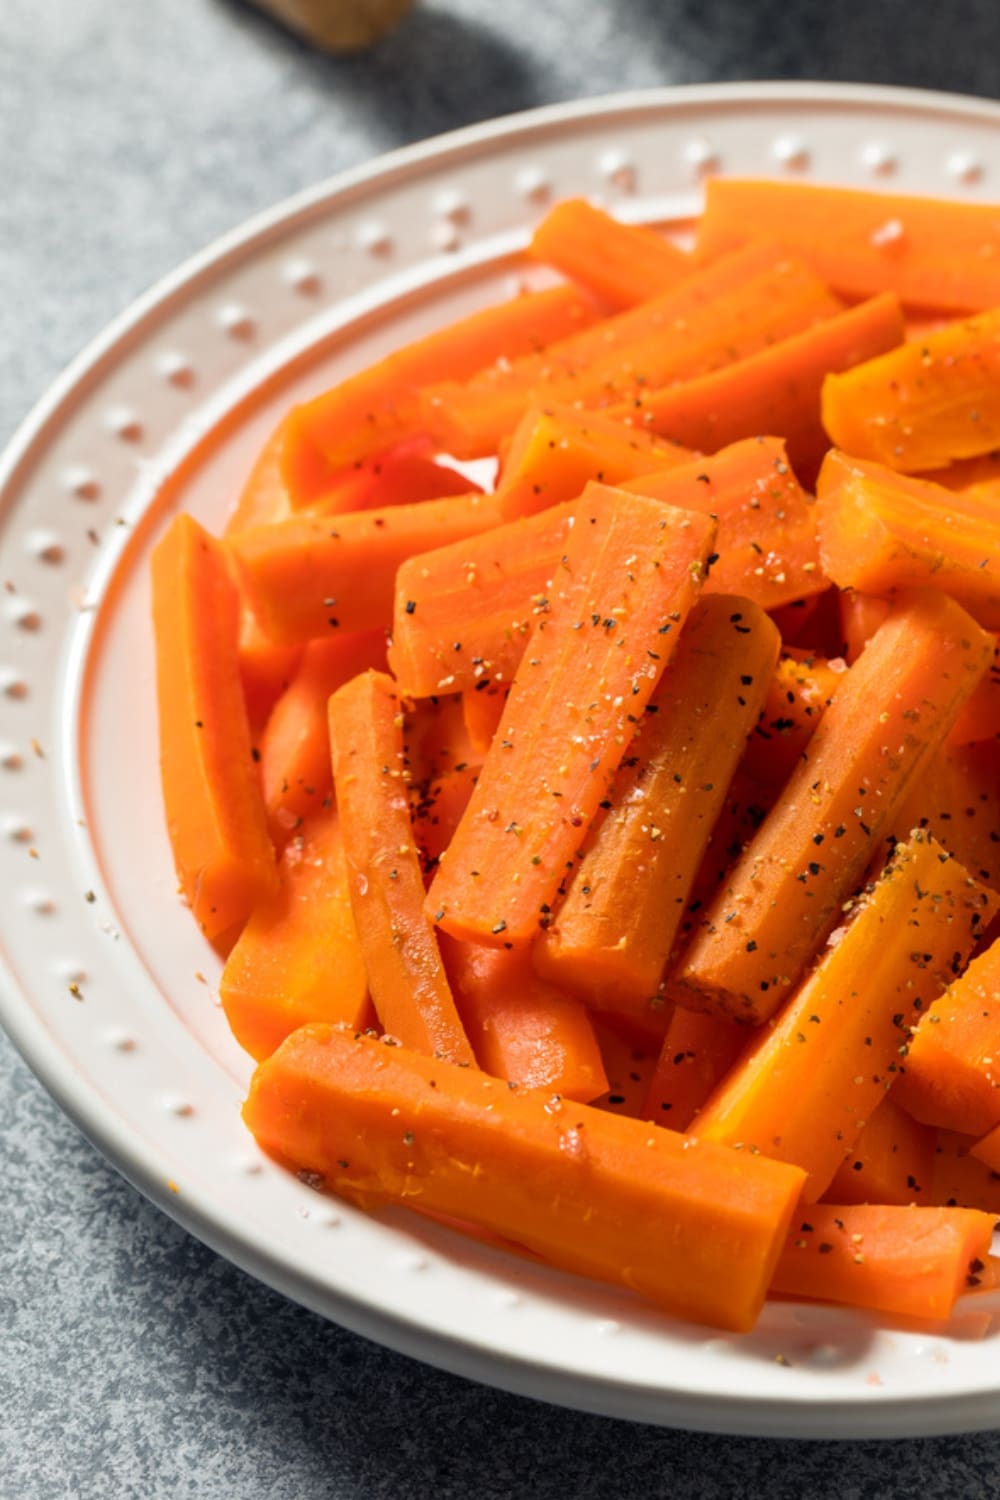 Steamed Carrots on a Plate Seasoned with Salt and Pepper